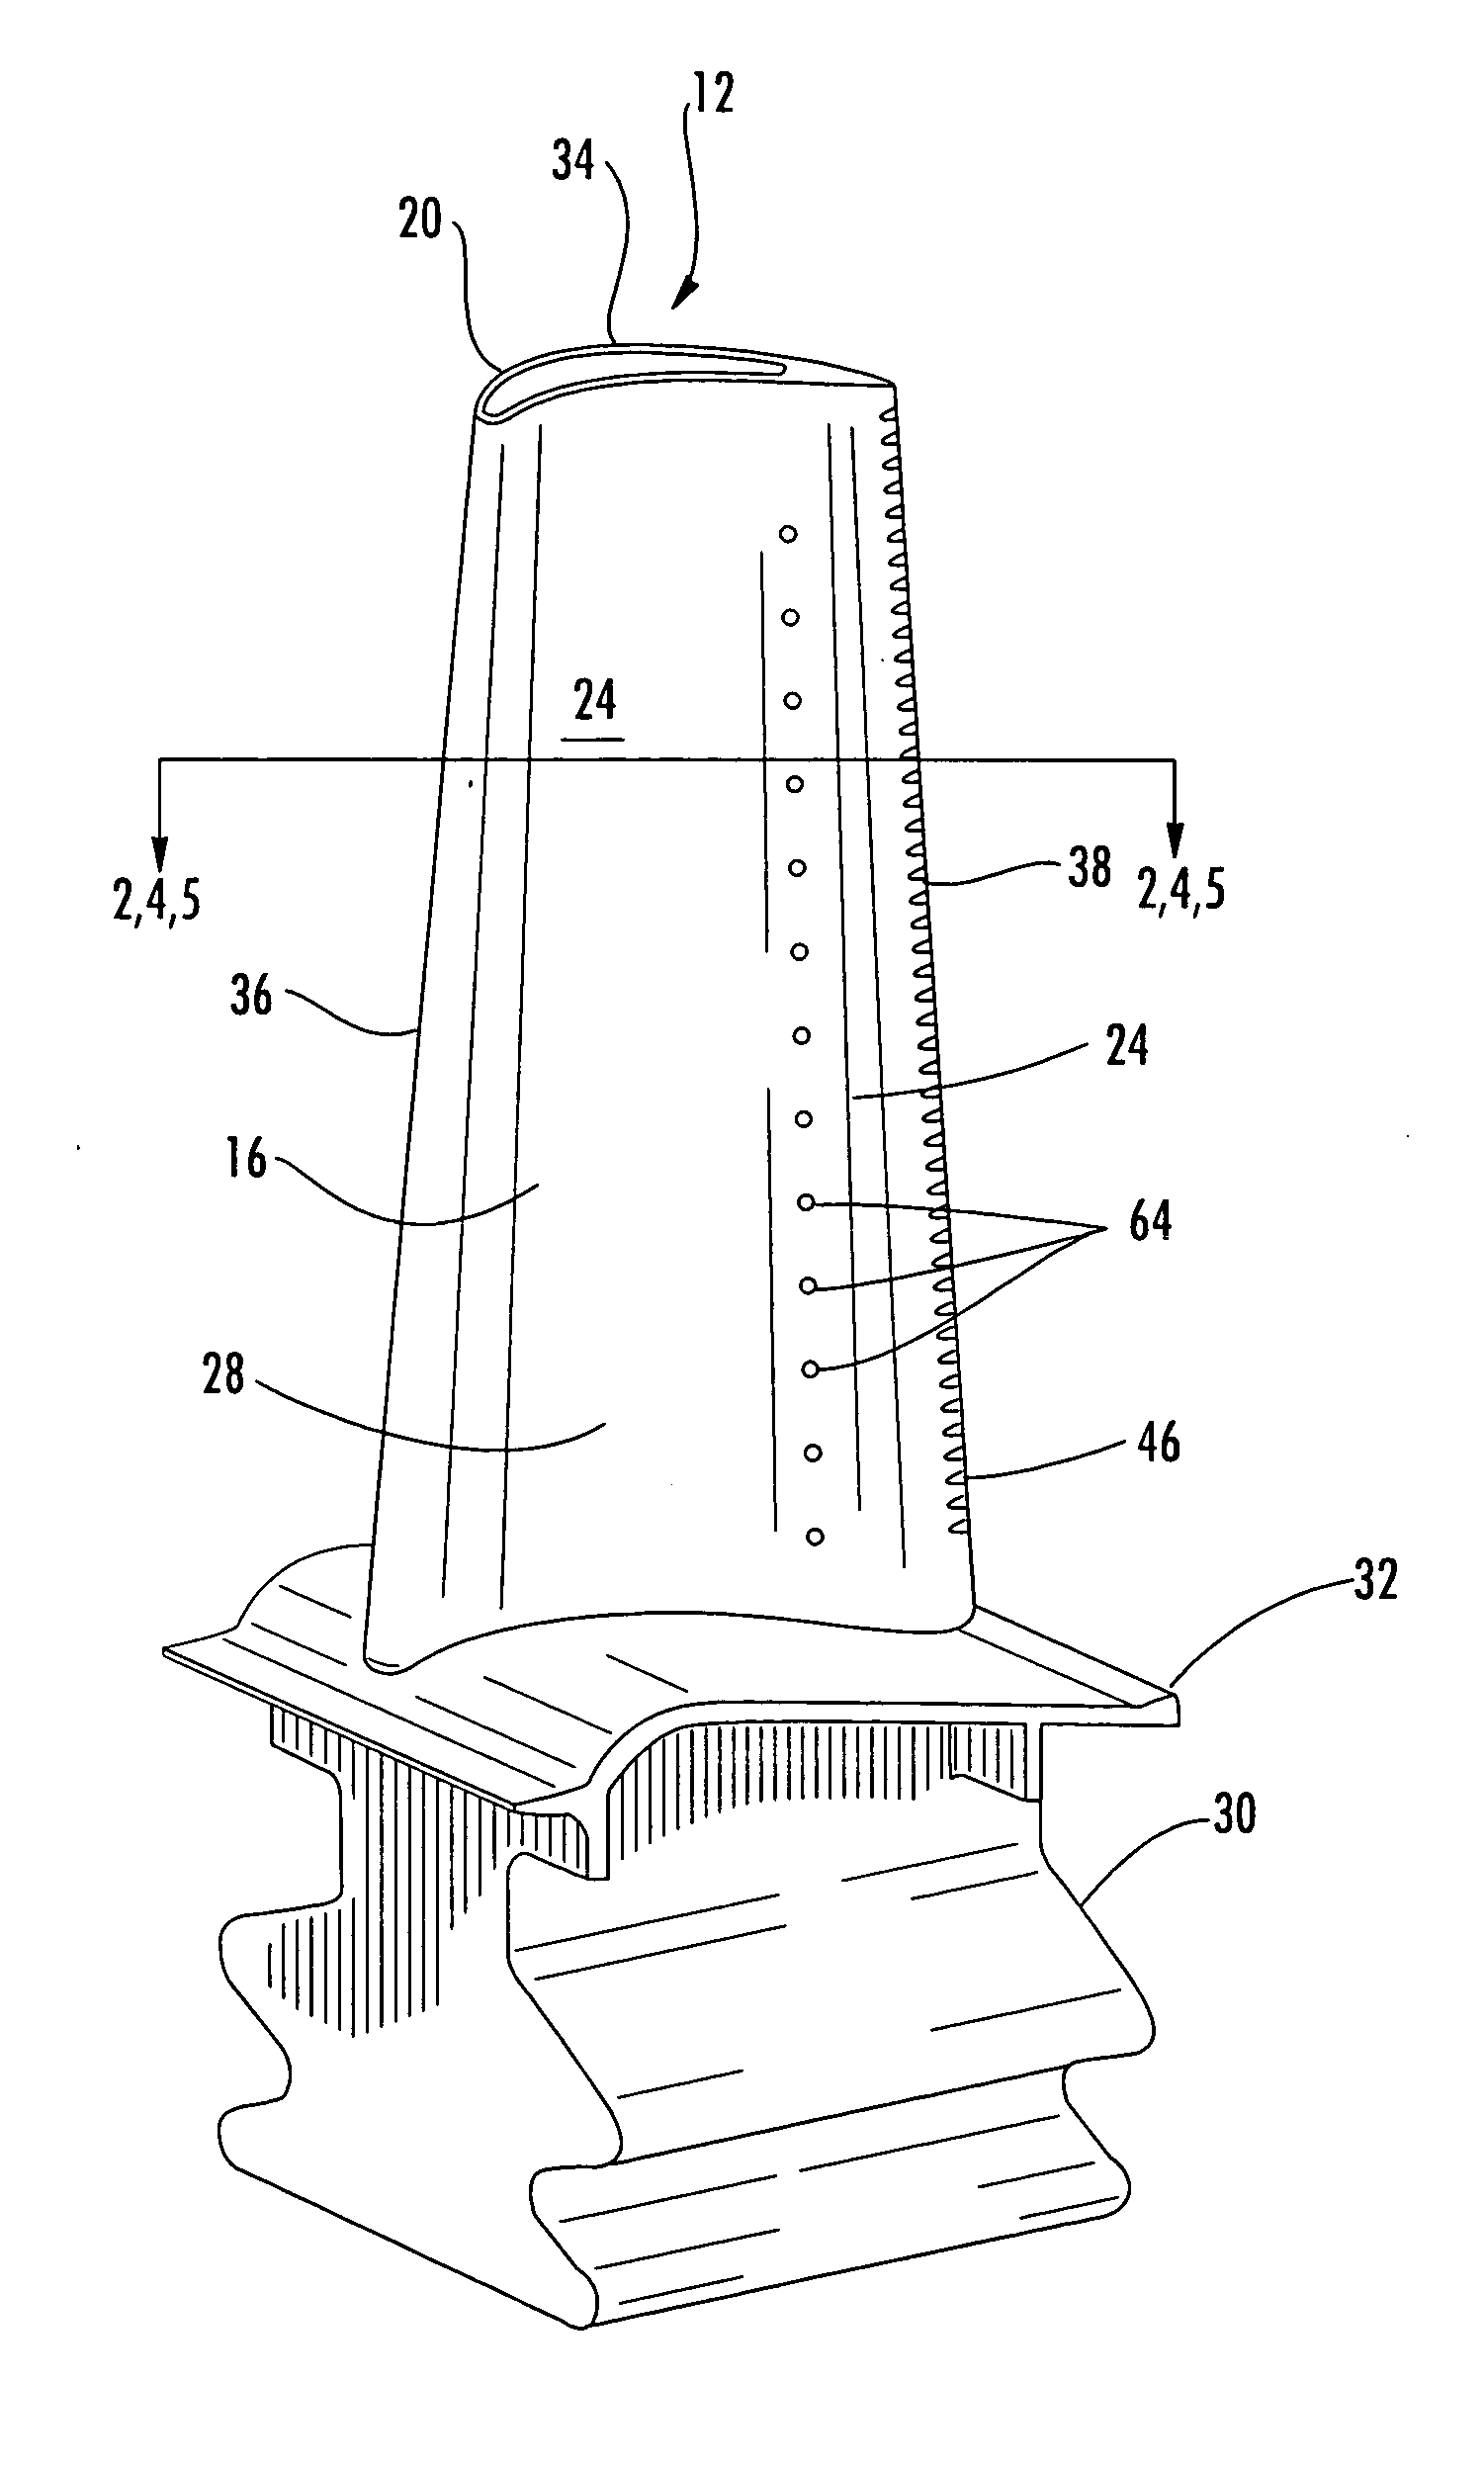 Turbine airfoil cooling system with near wall pin fin cooling chambers